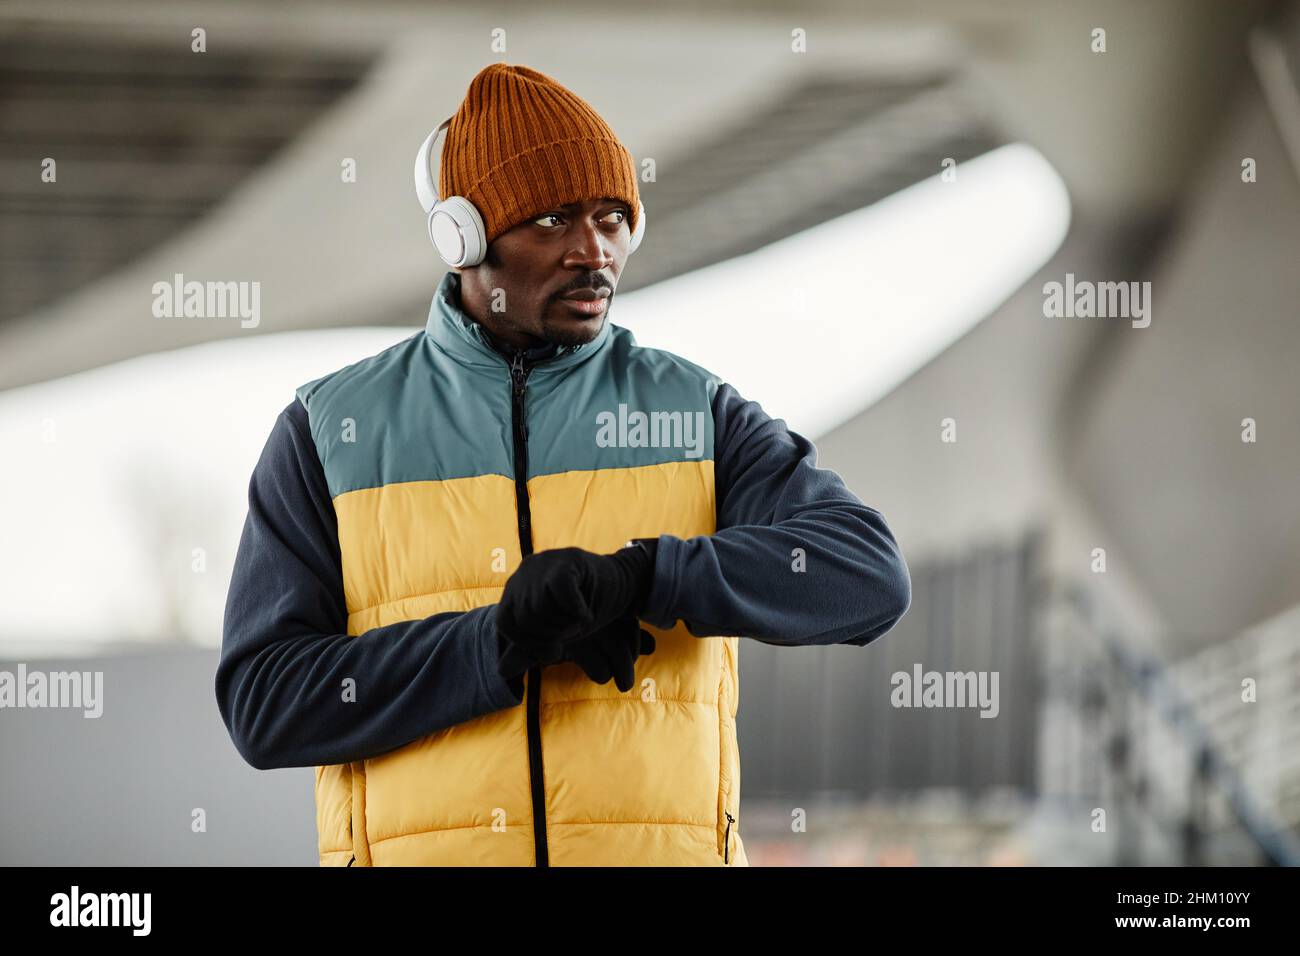 Contemporary young black man in headphones over beanie hat, sleeveless jacket on tracksuit and gloves Stock Photo